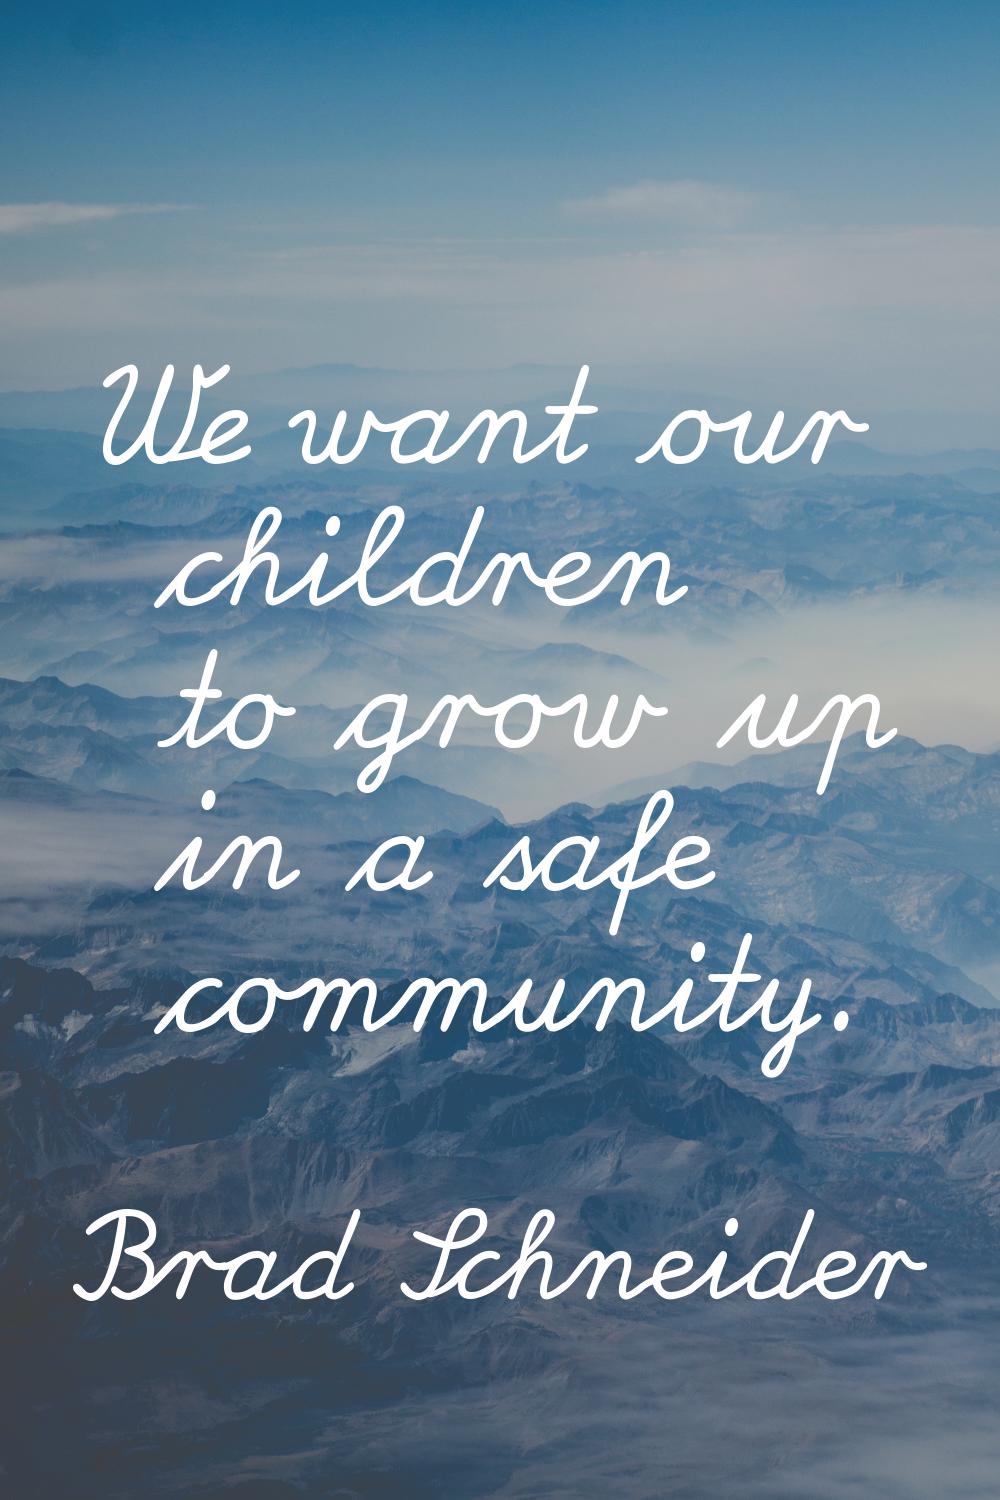 We want our children to grow up in a safe community.